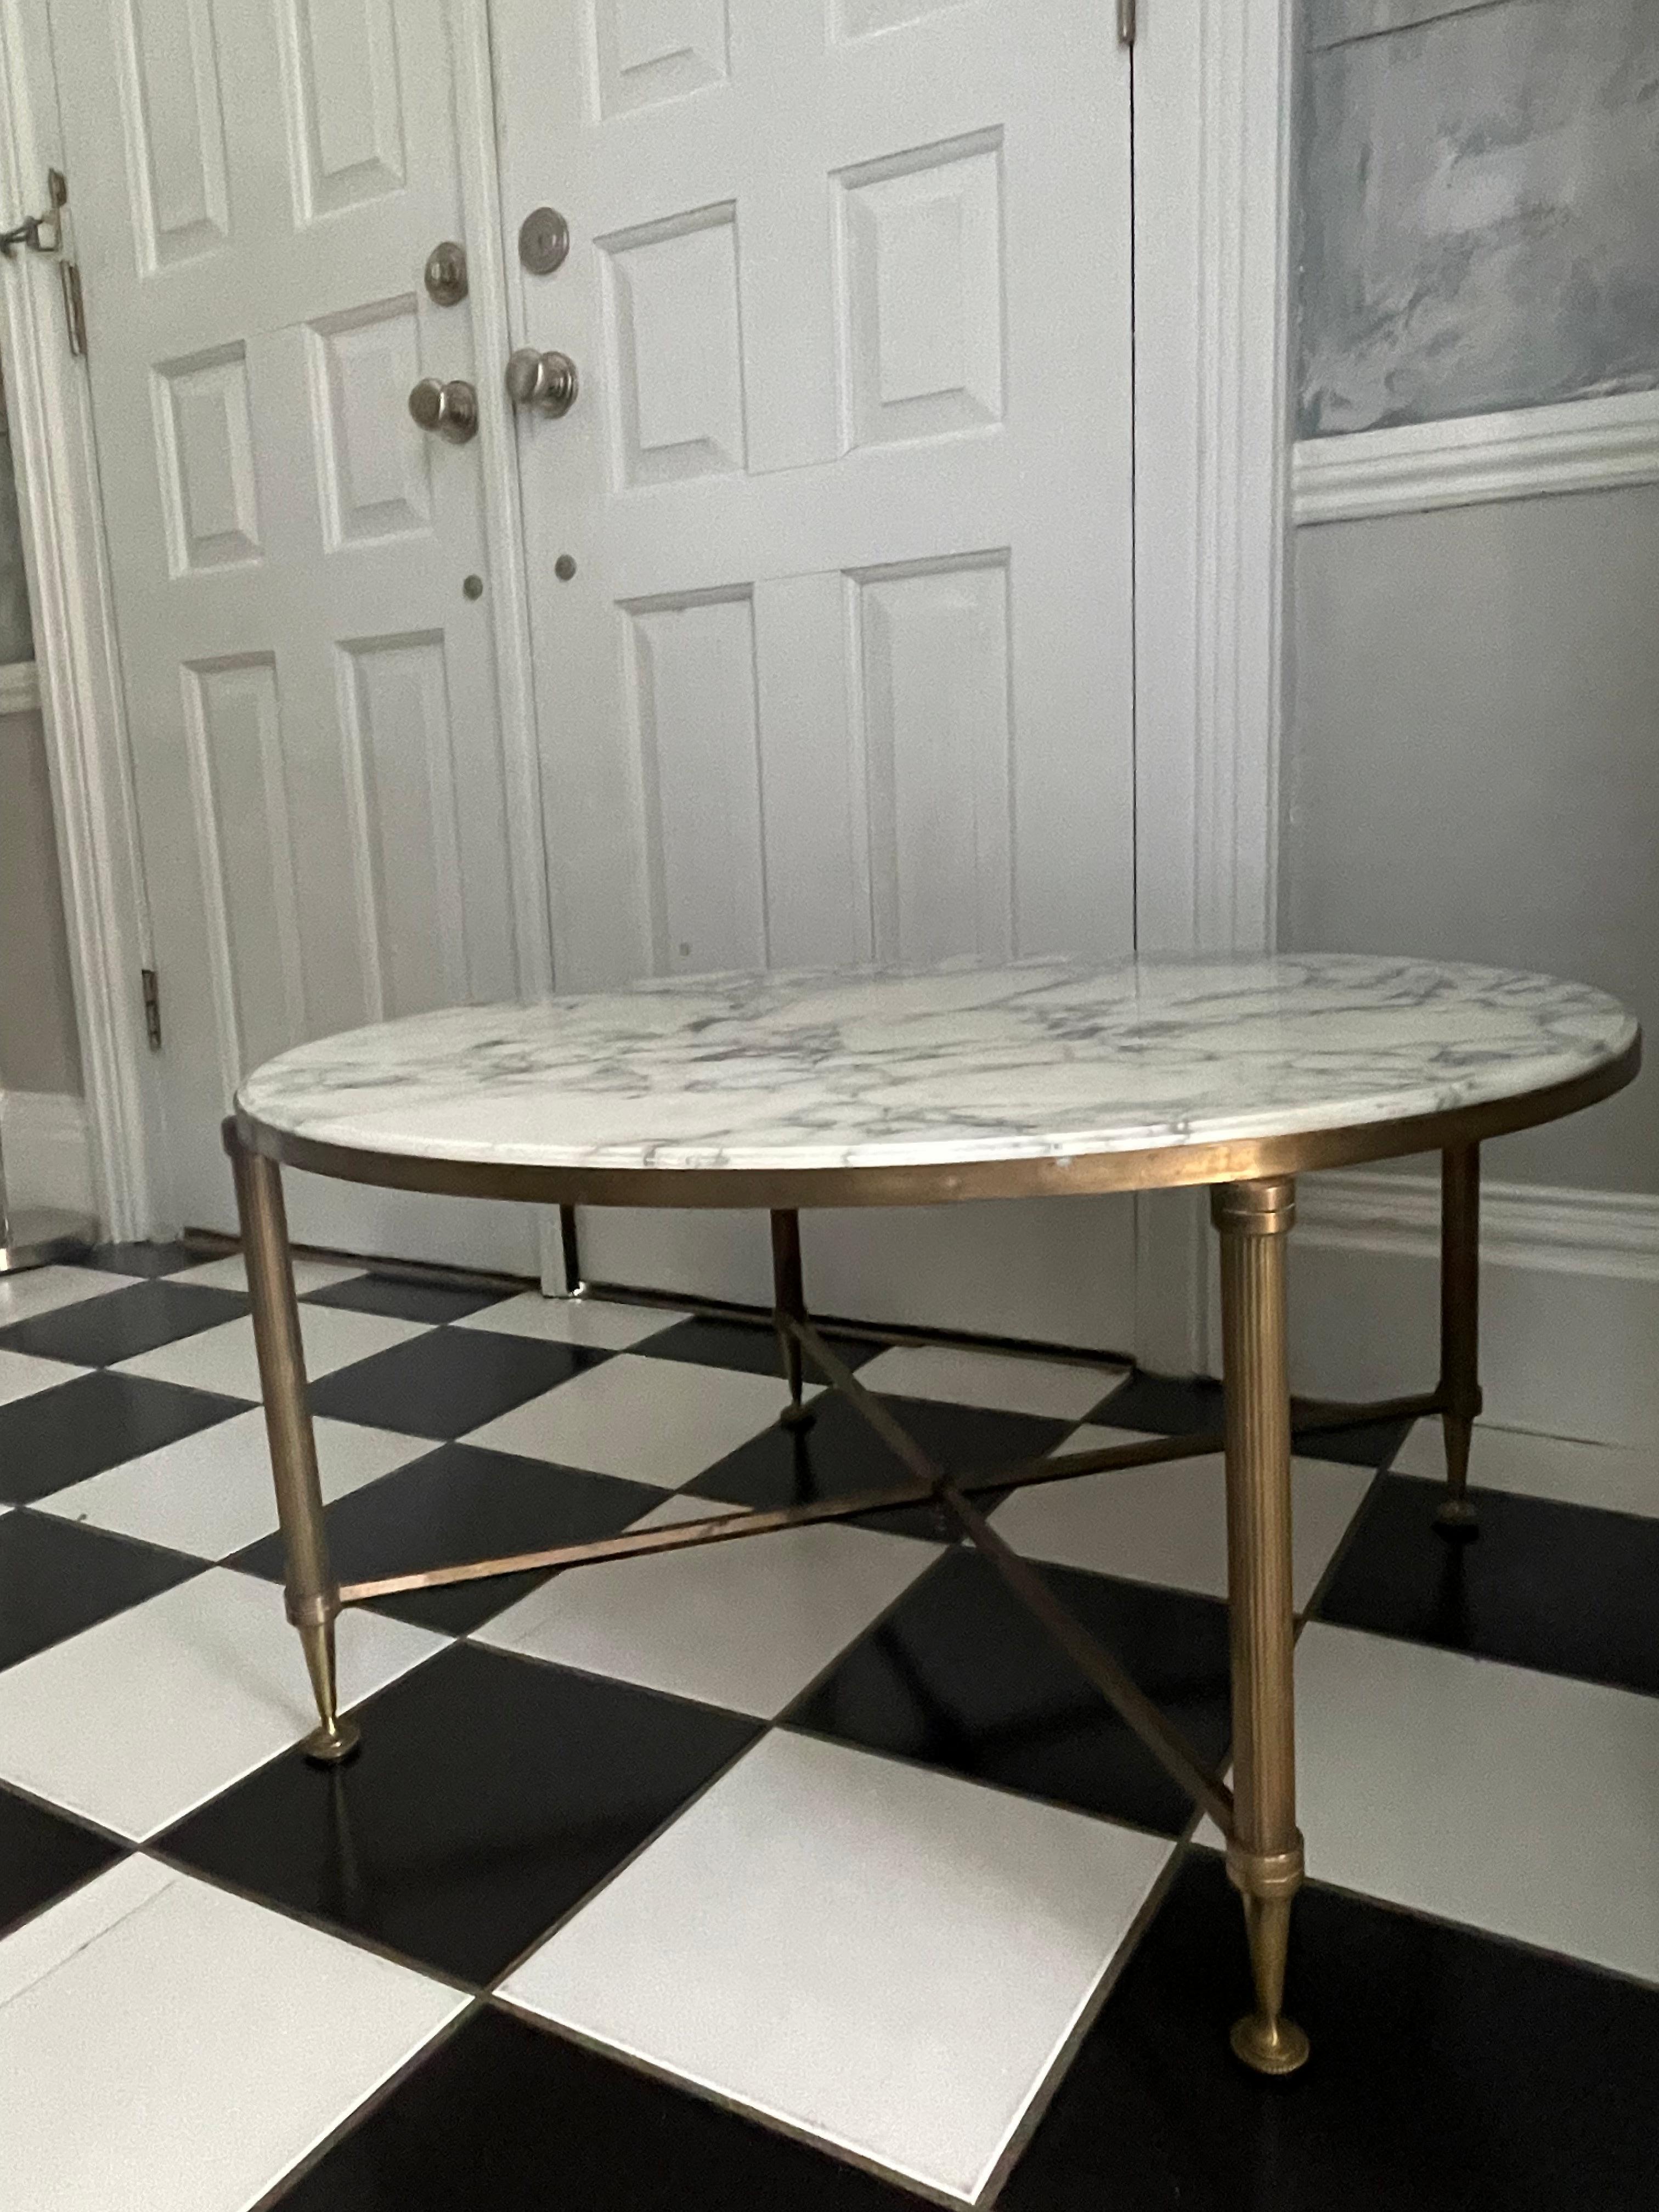 This little beauty is perfect in nearly all settings and will give you a sleek and subtly-glamorous focal point in front of your sofa. Made of brass and with reeded legs and its original marble top, it dates to the 1960s and is in very good vintage